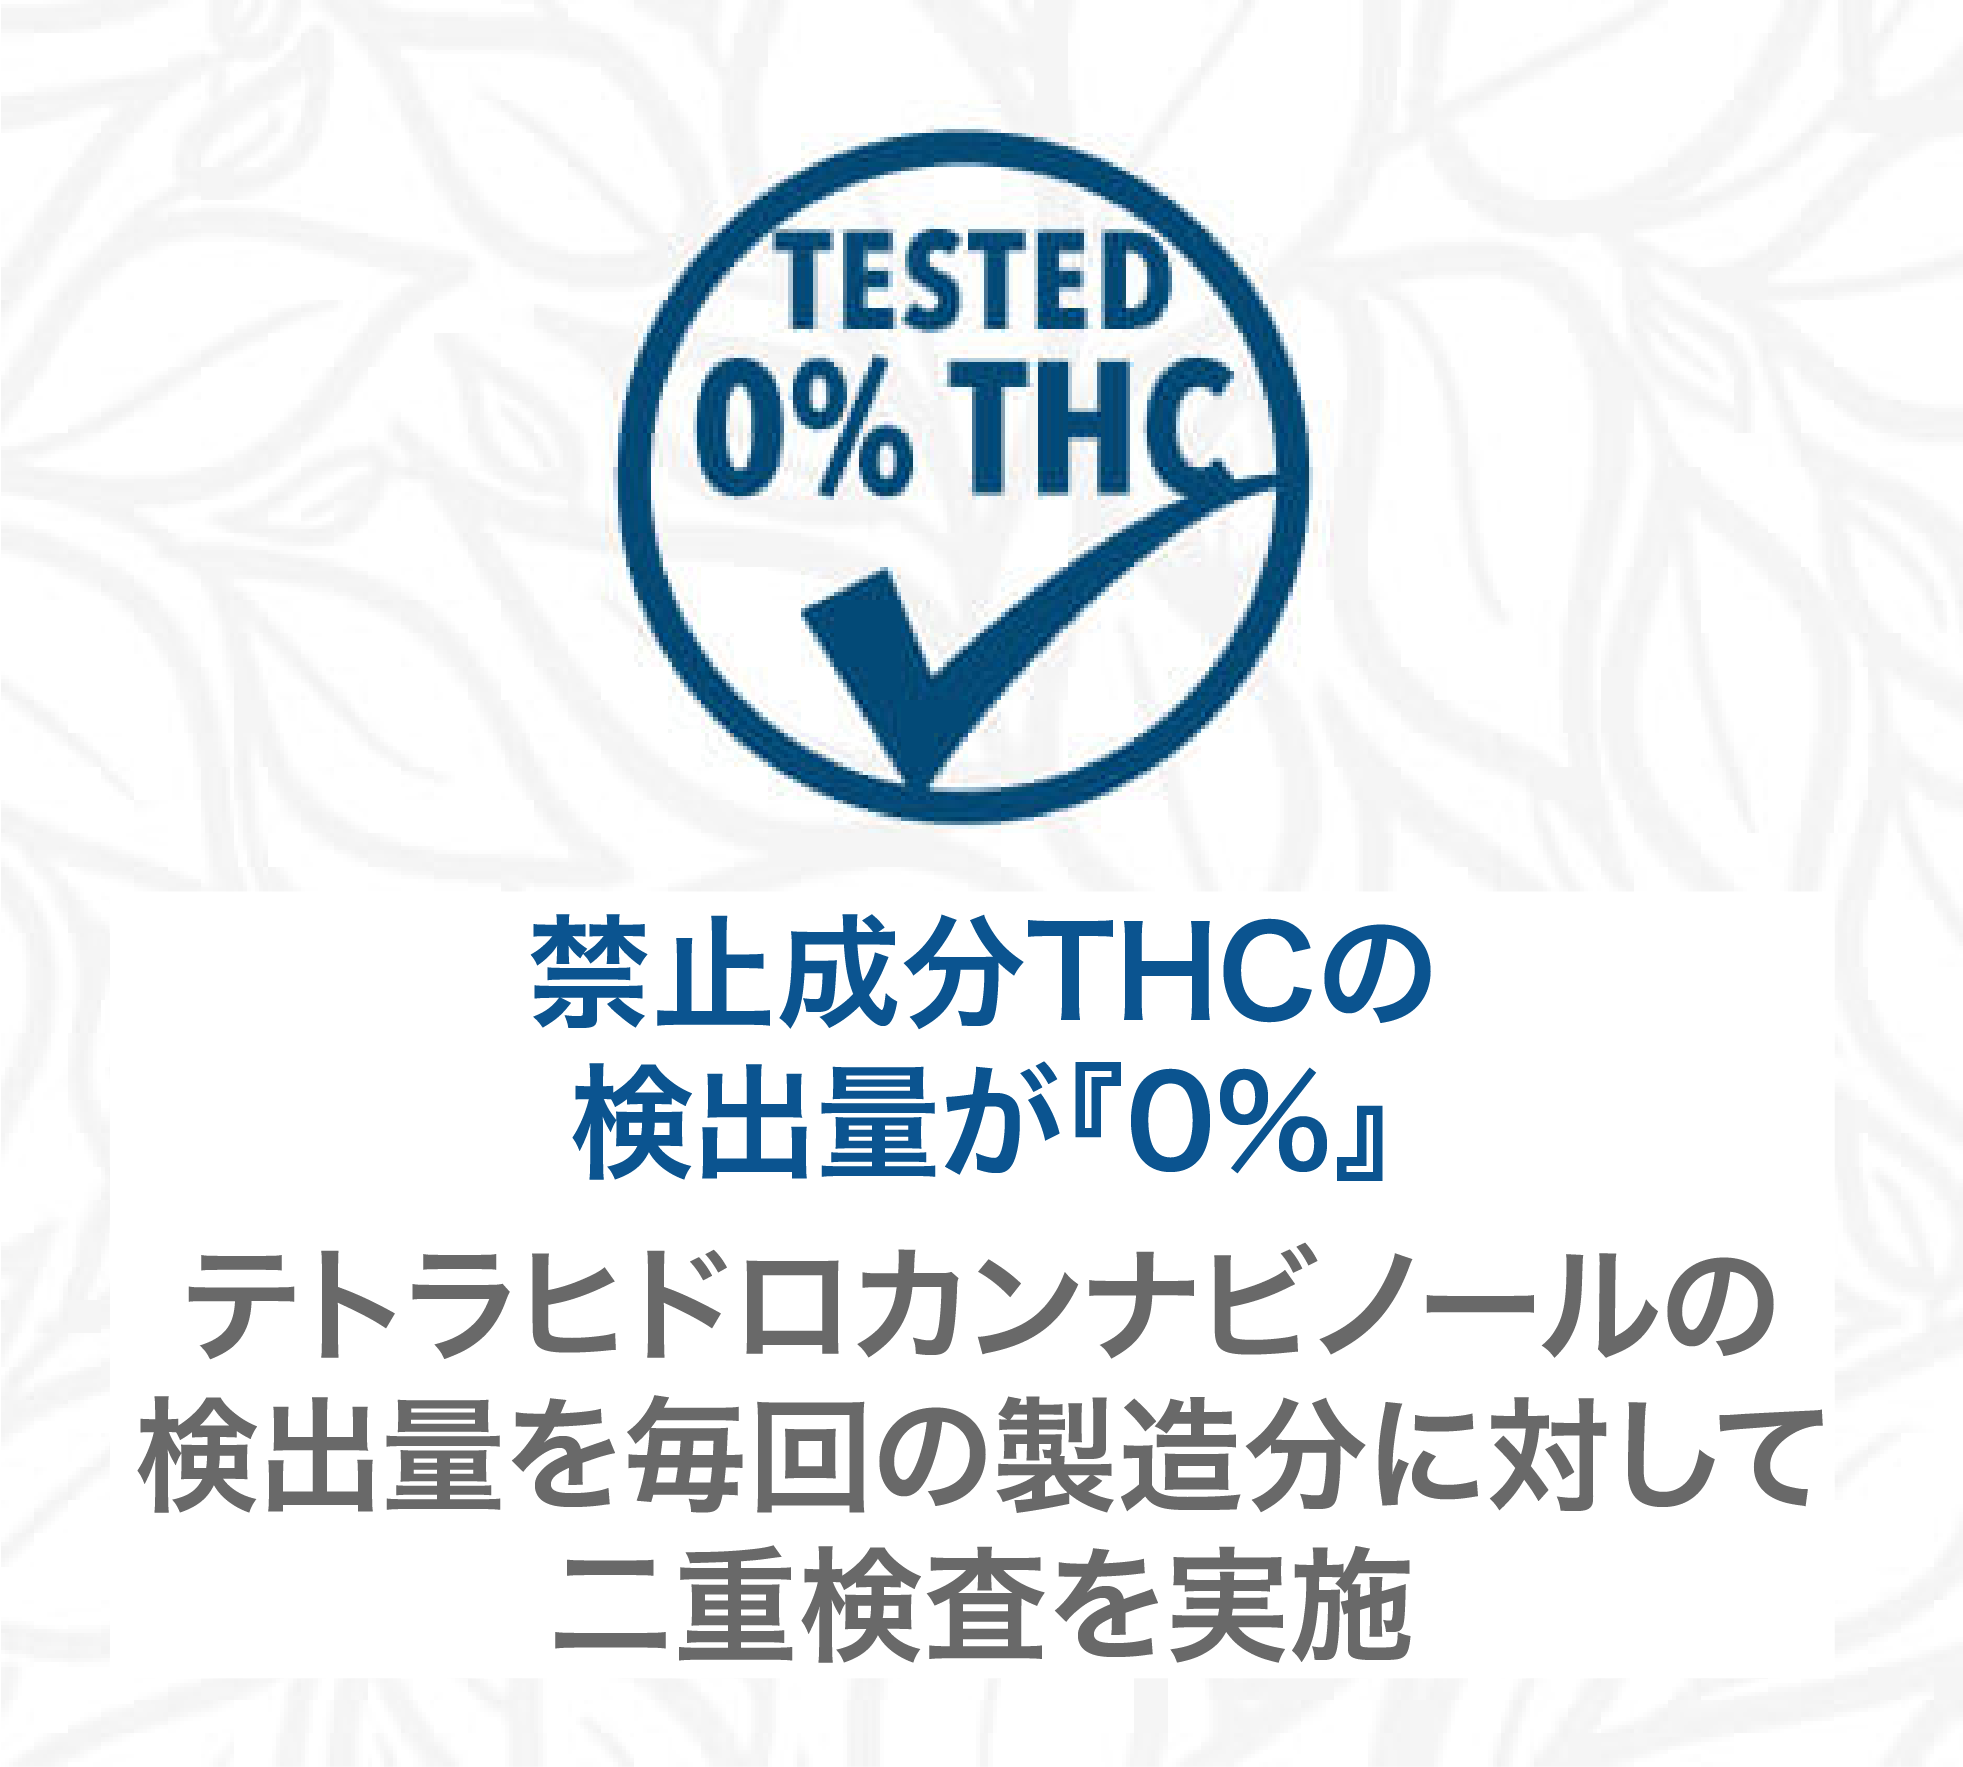 Tested 0% THC